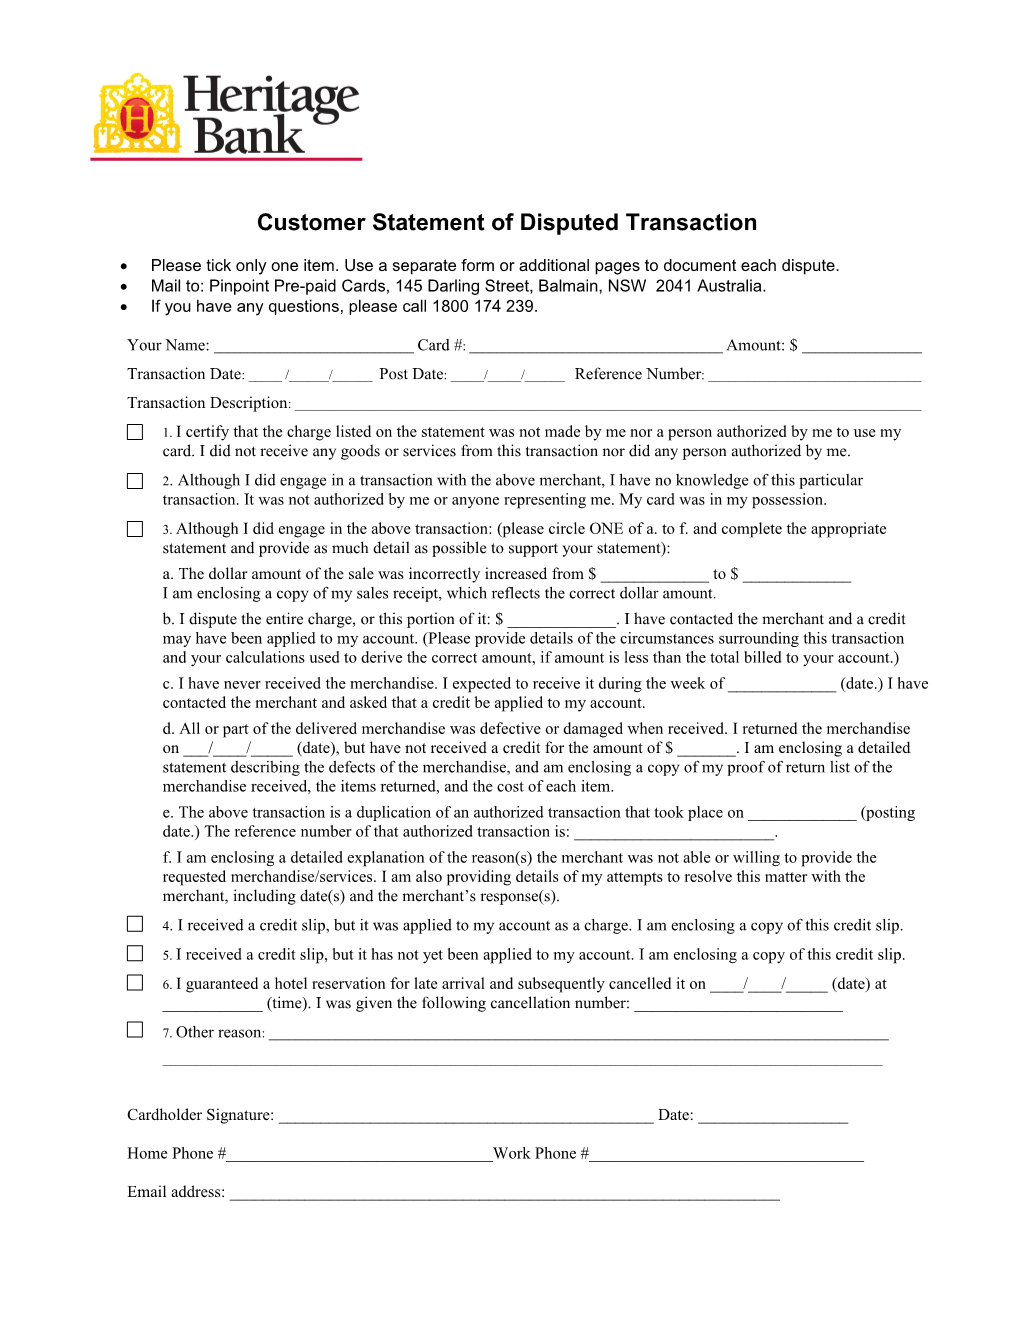 Customer Statement of Disputed Transaction